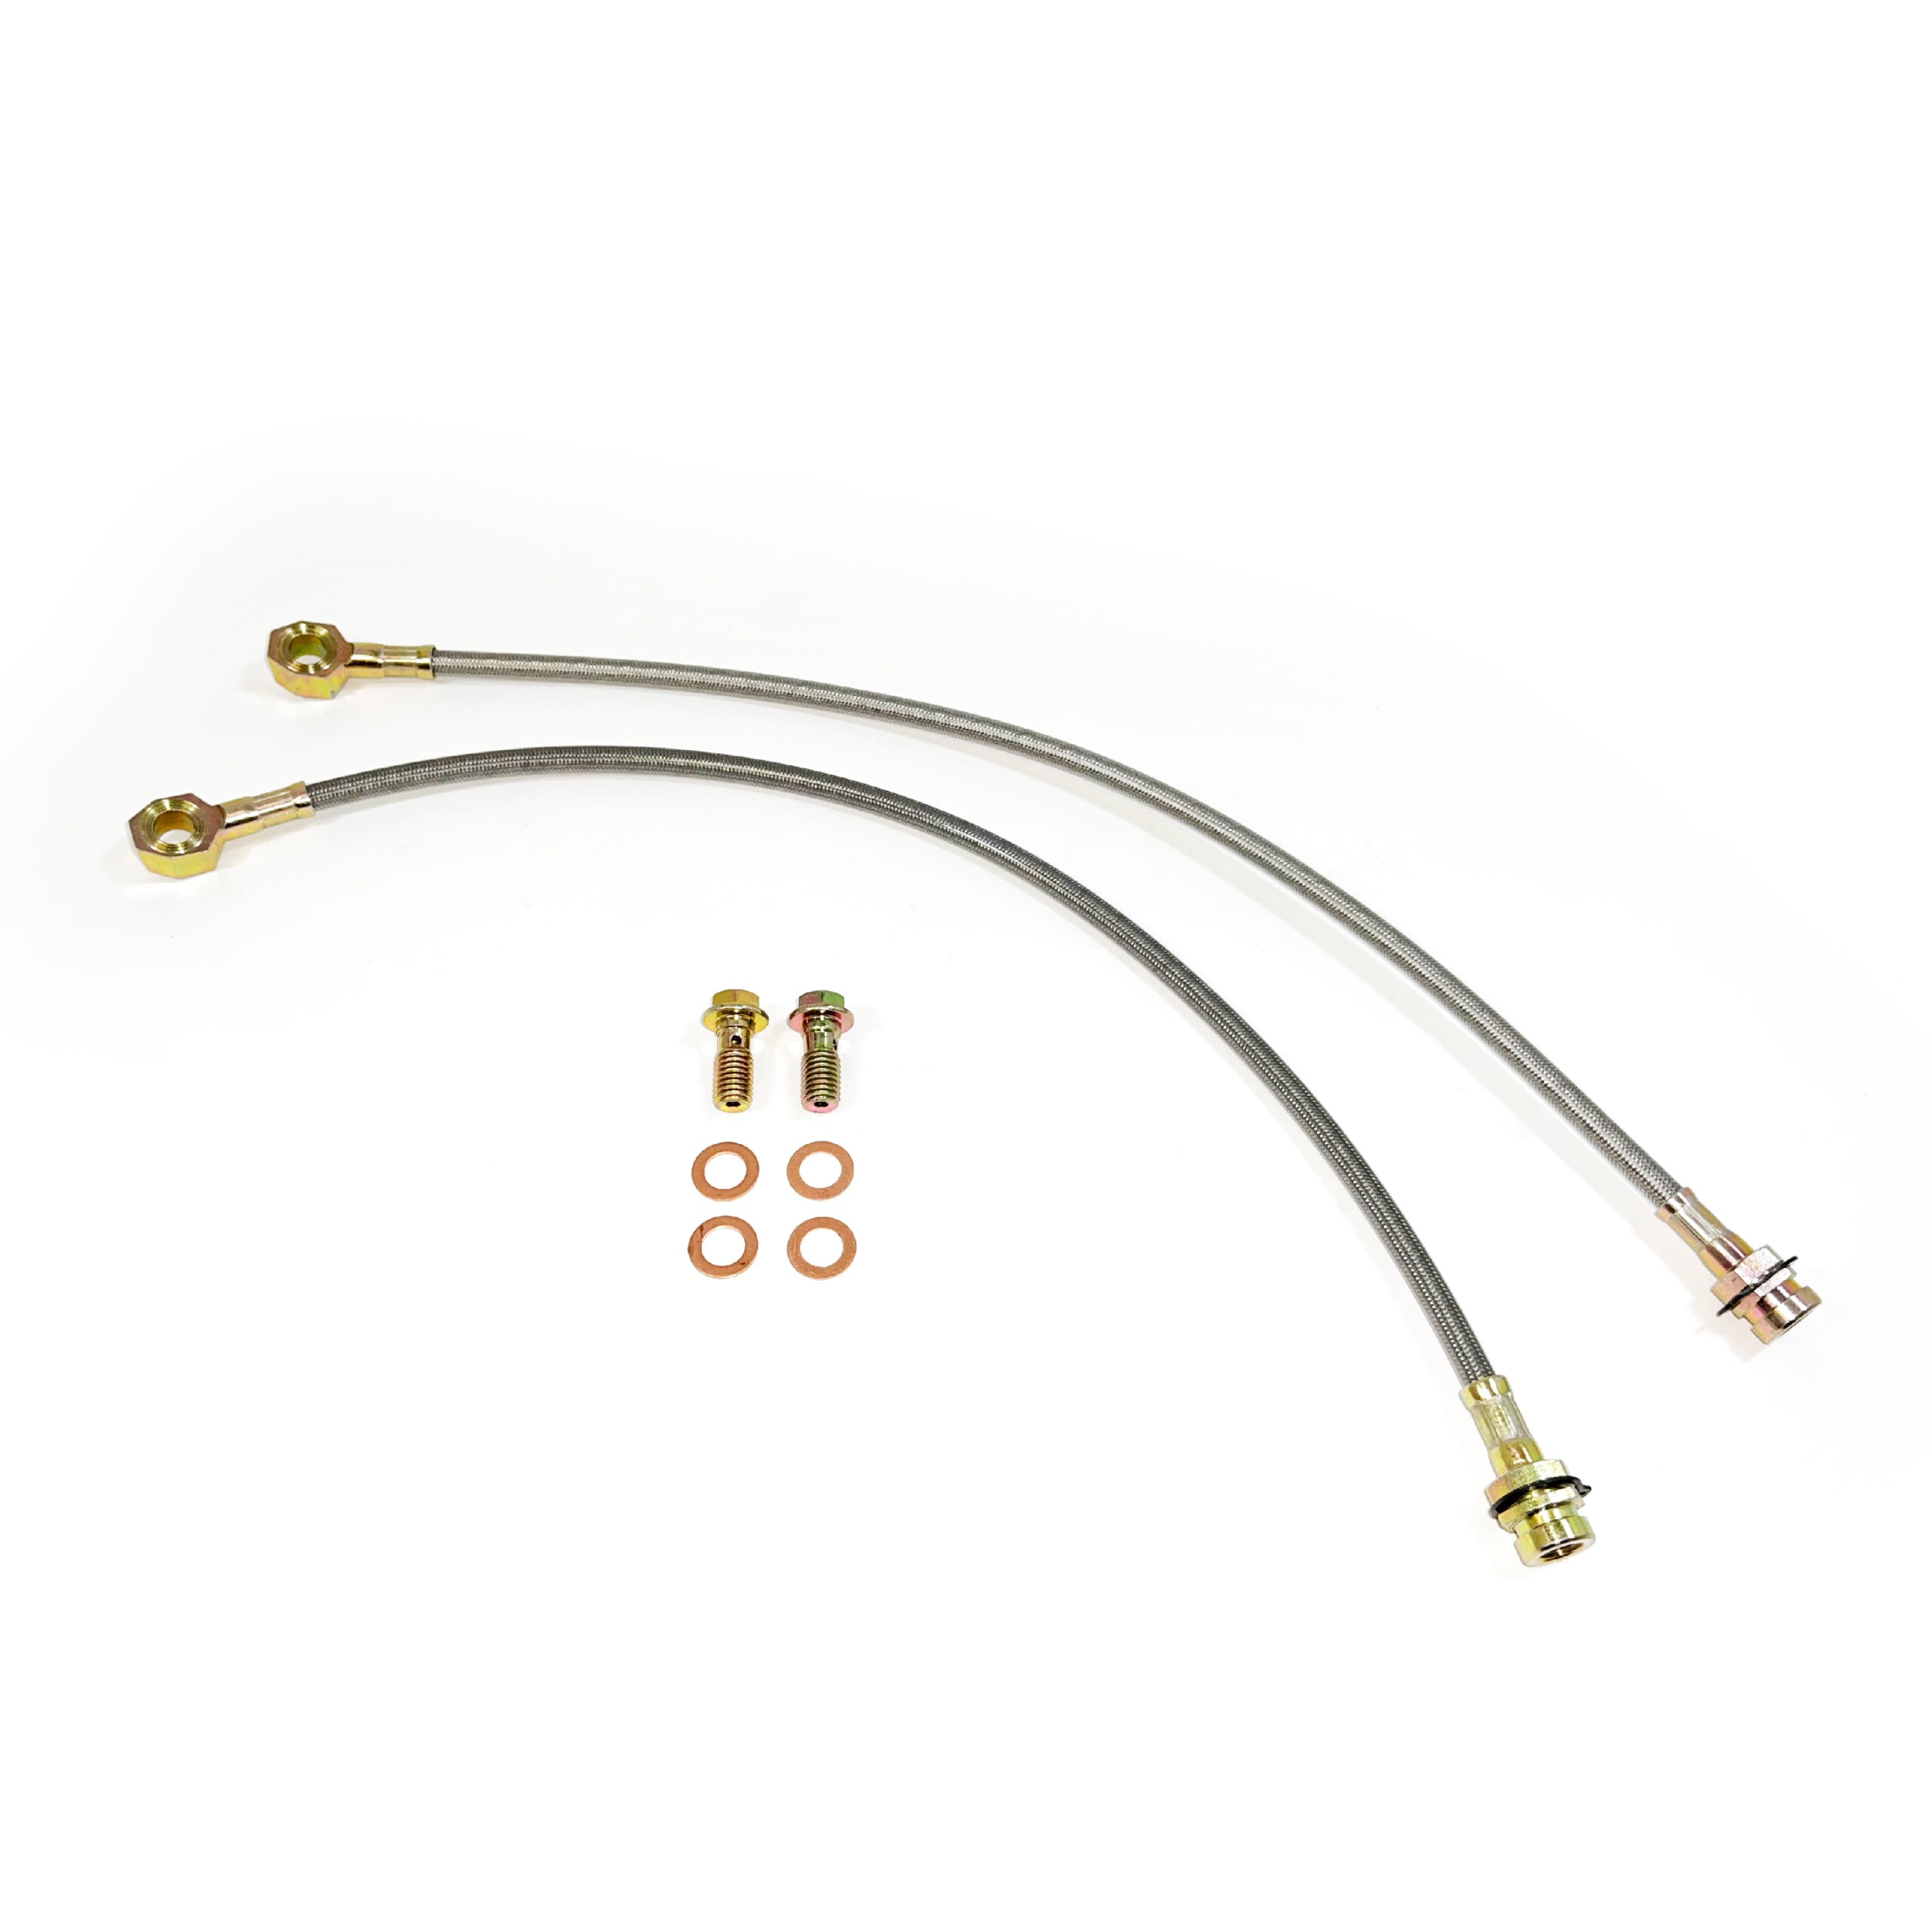 Racing Power Company R1731 16 inch gm metric stainless brake hose kit with tabs